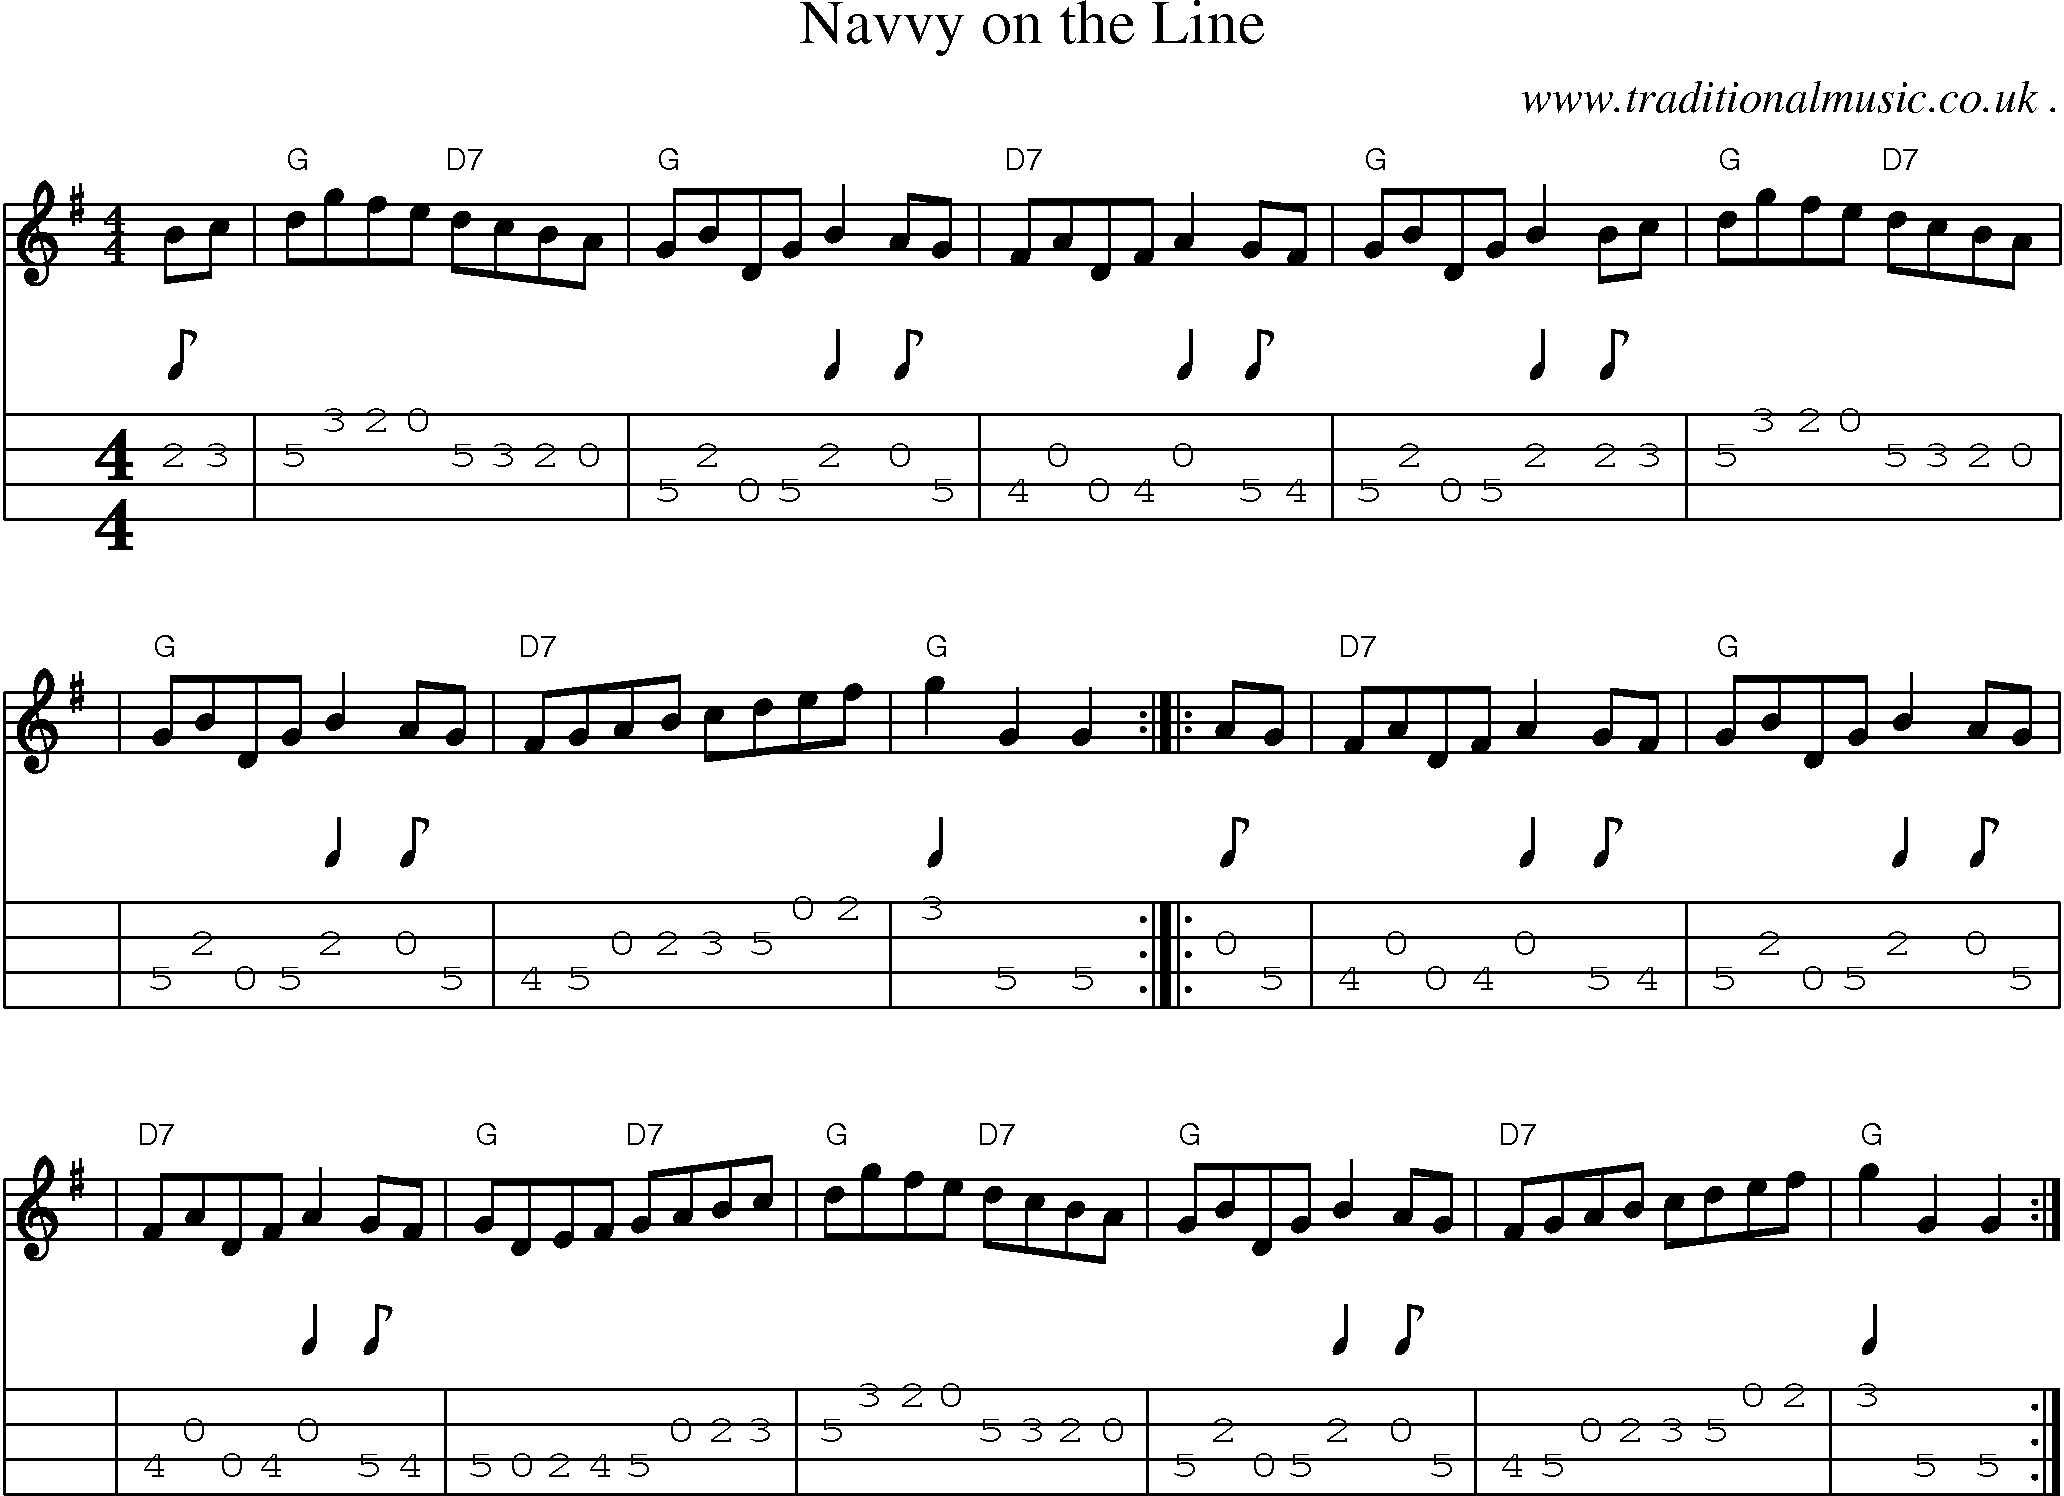 Sheet-music  score, Chords and Mandolin Tabs for Navvy On The Line